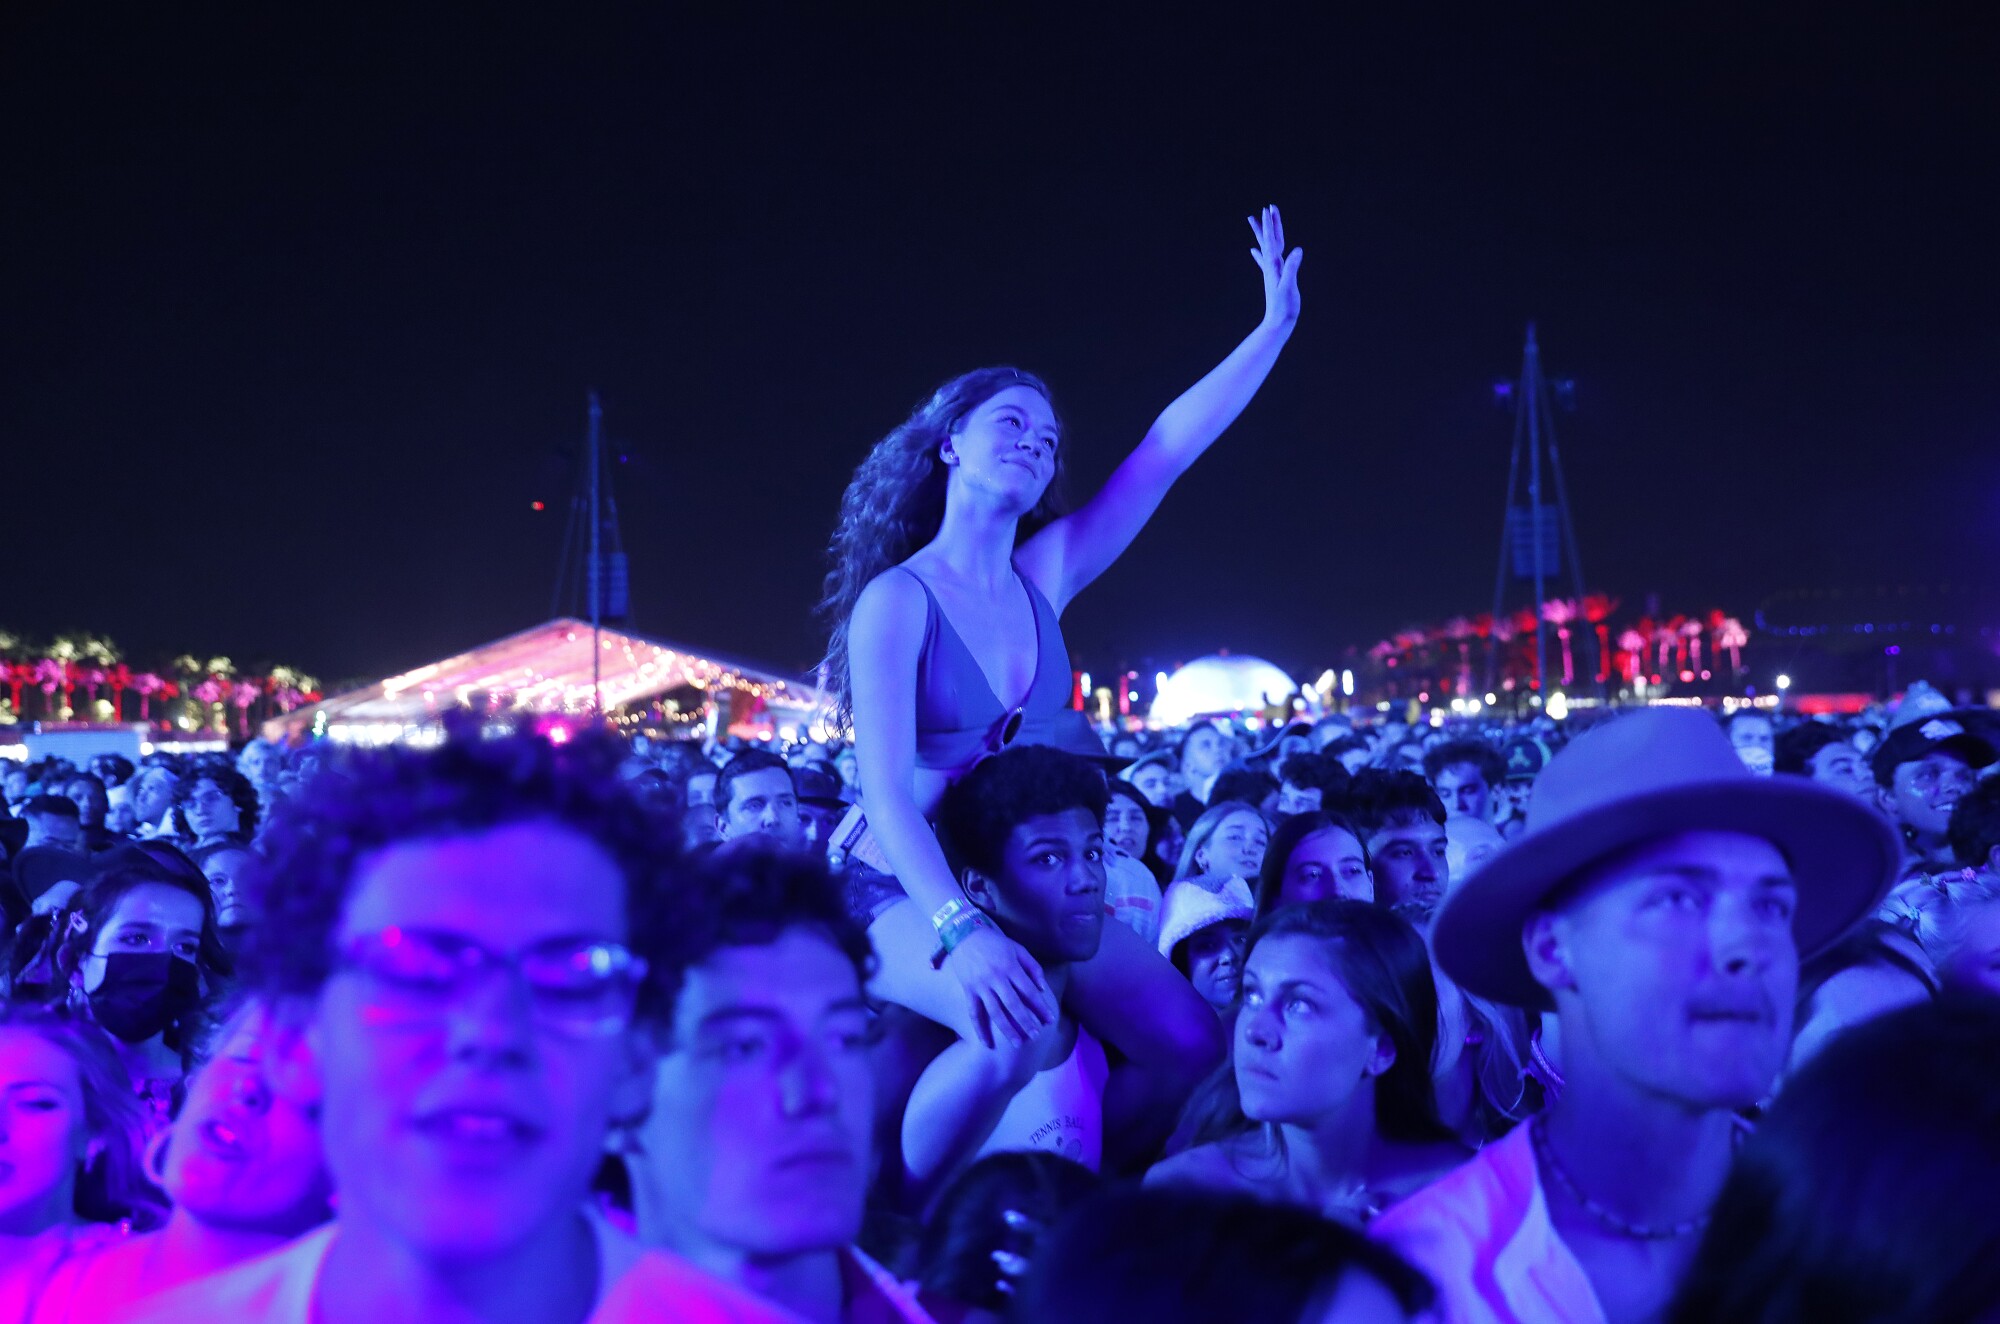 Fans in purple-tinted light watch a performance at night.